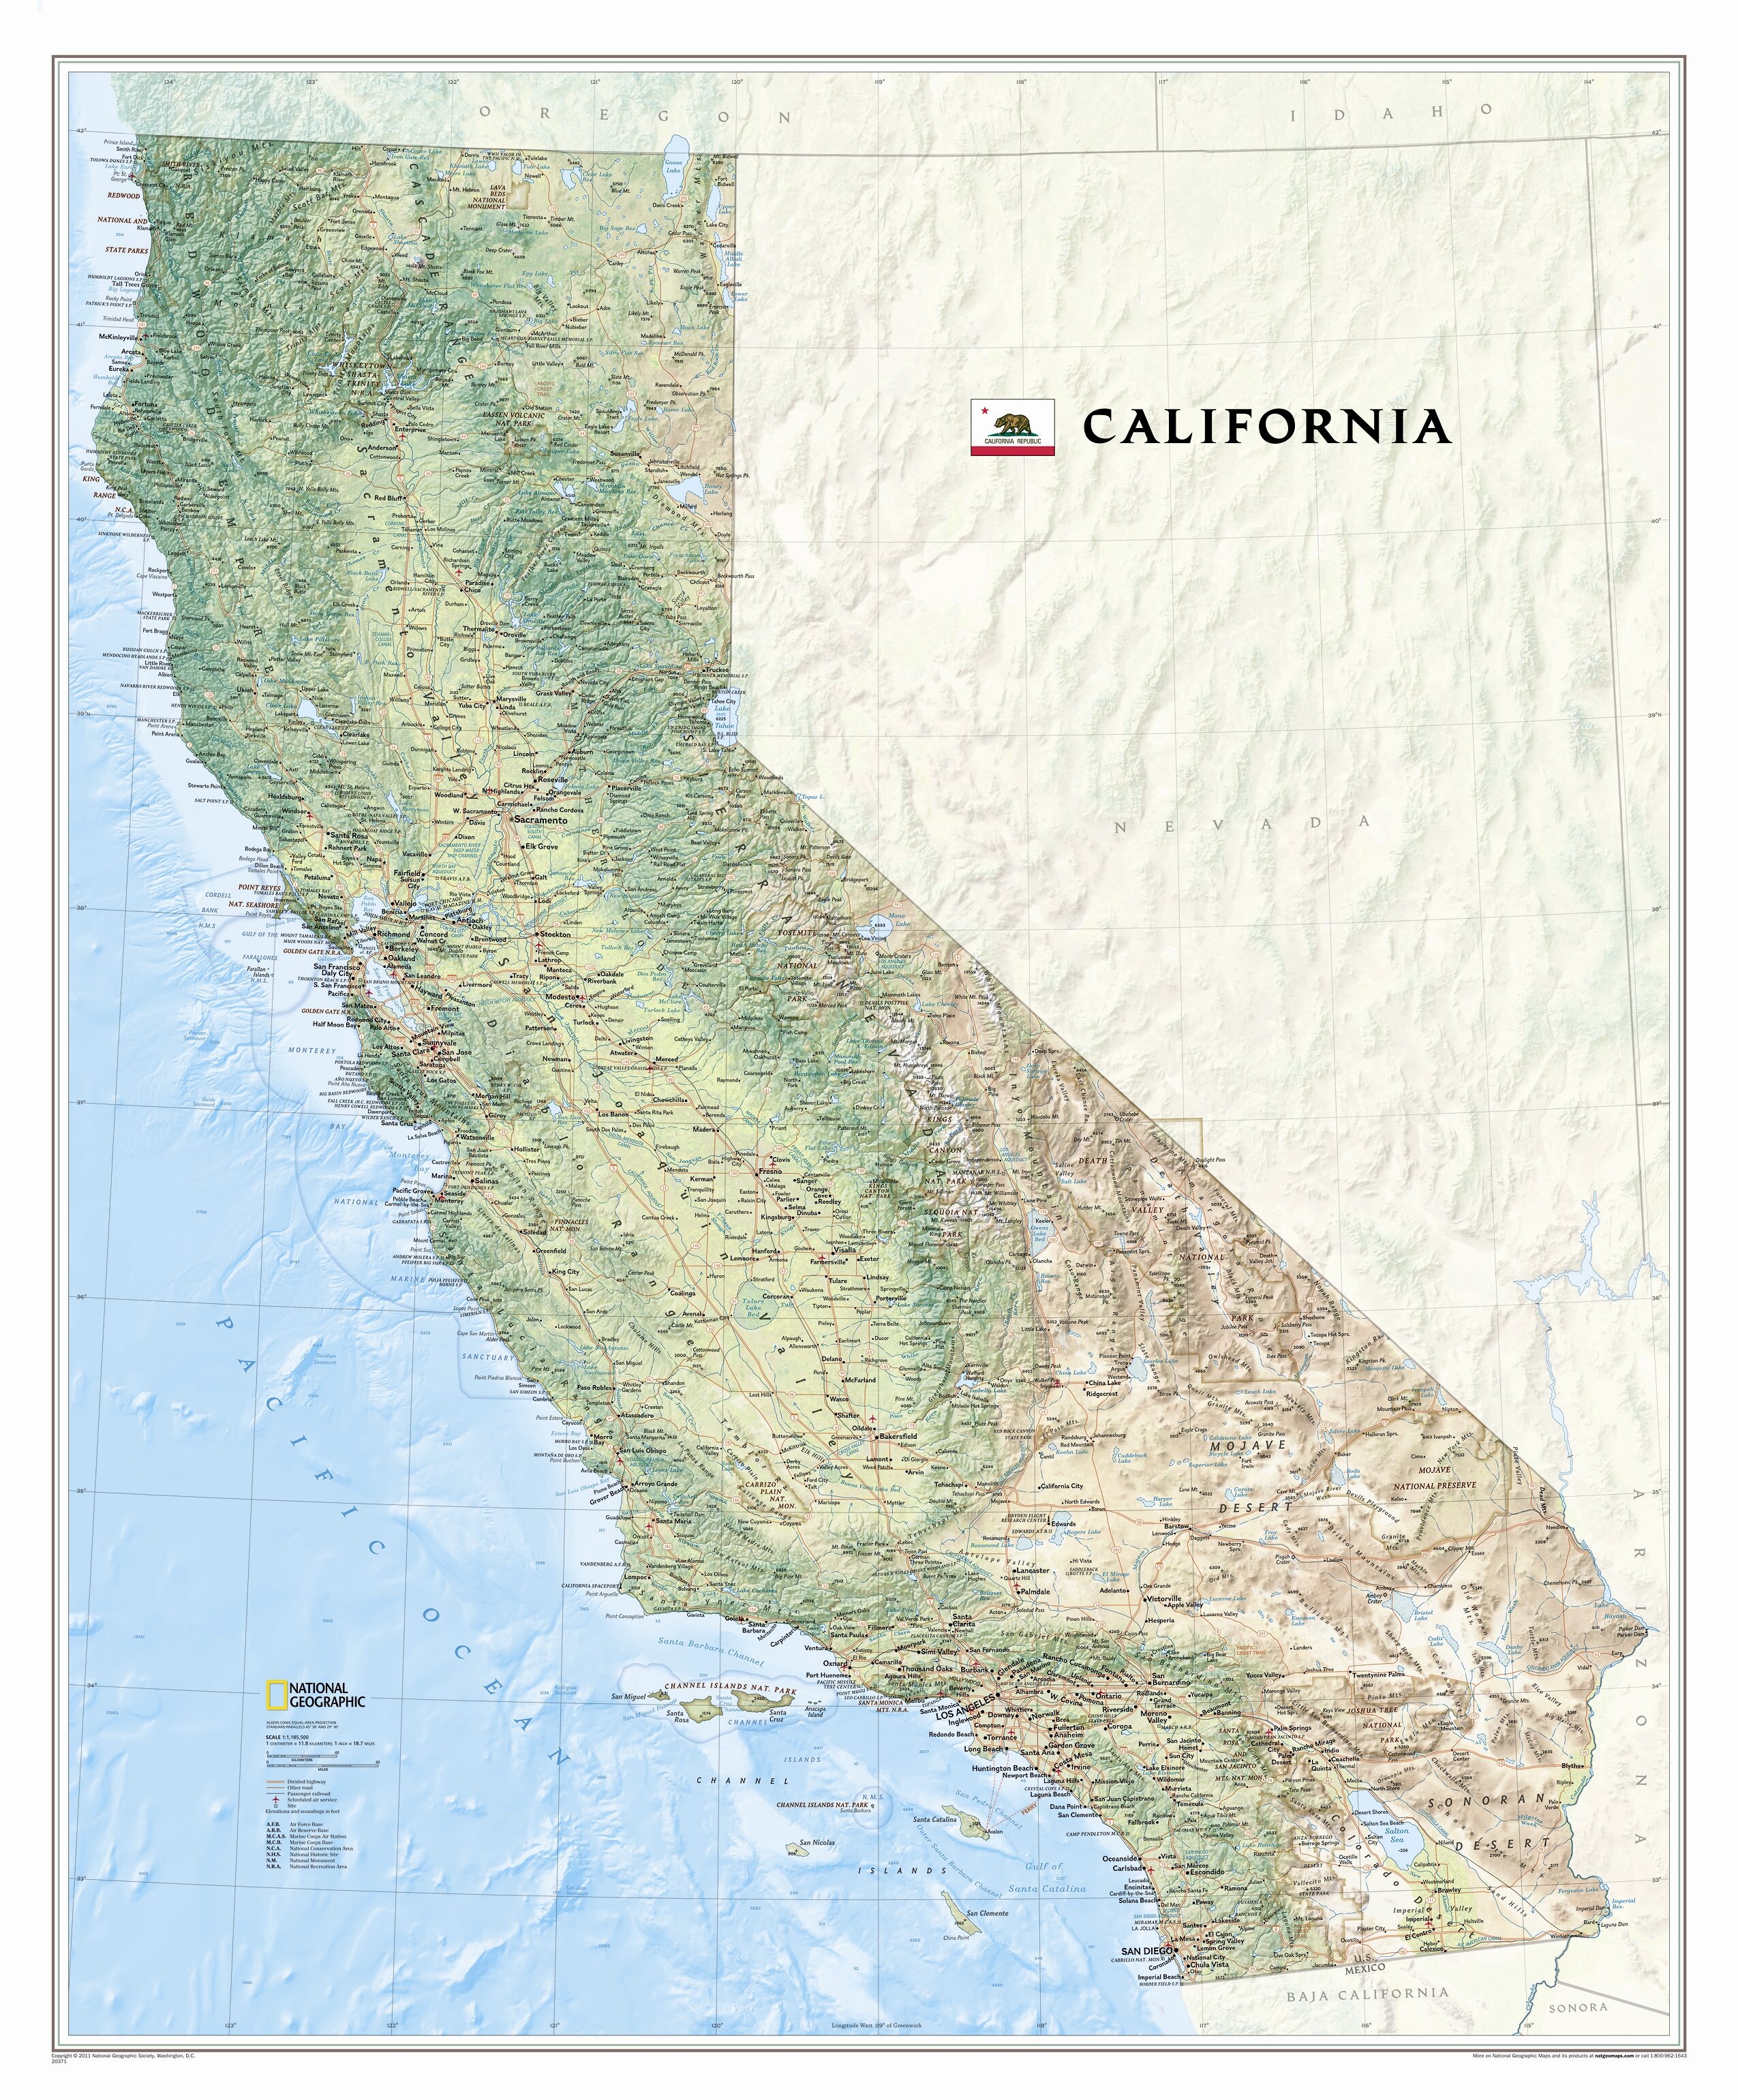 National Geographic Maps California State Wall Map Wayfair 4486